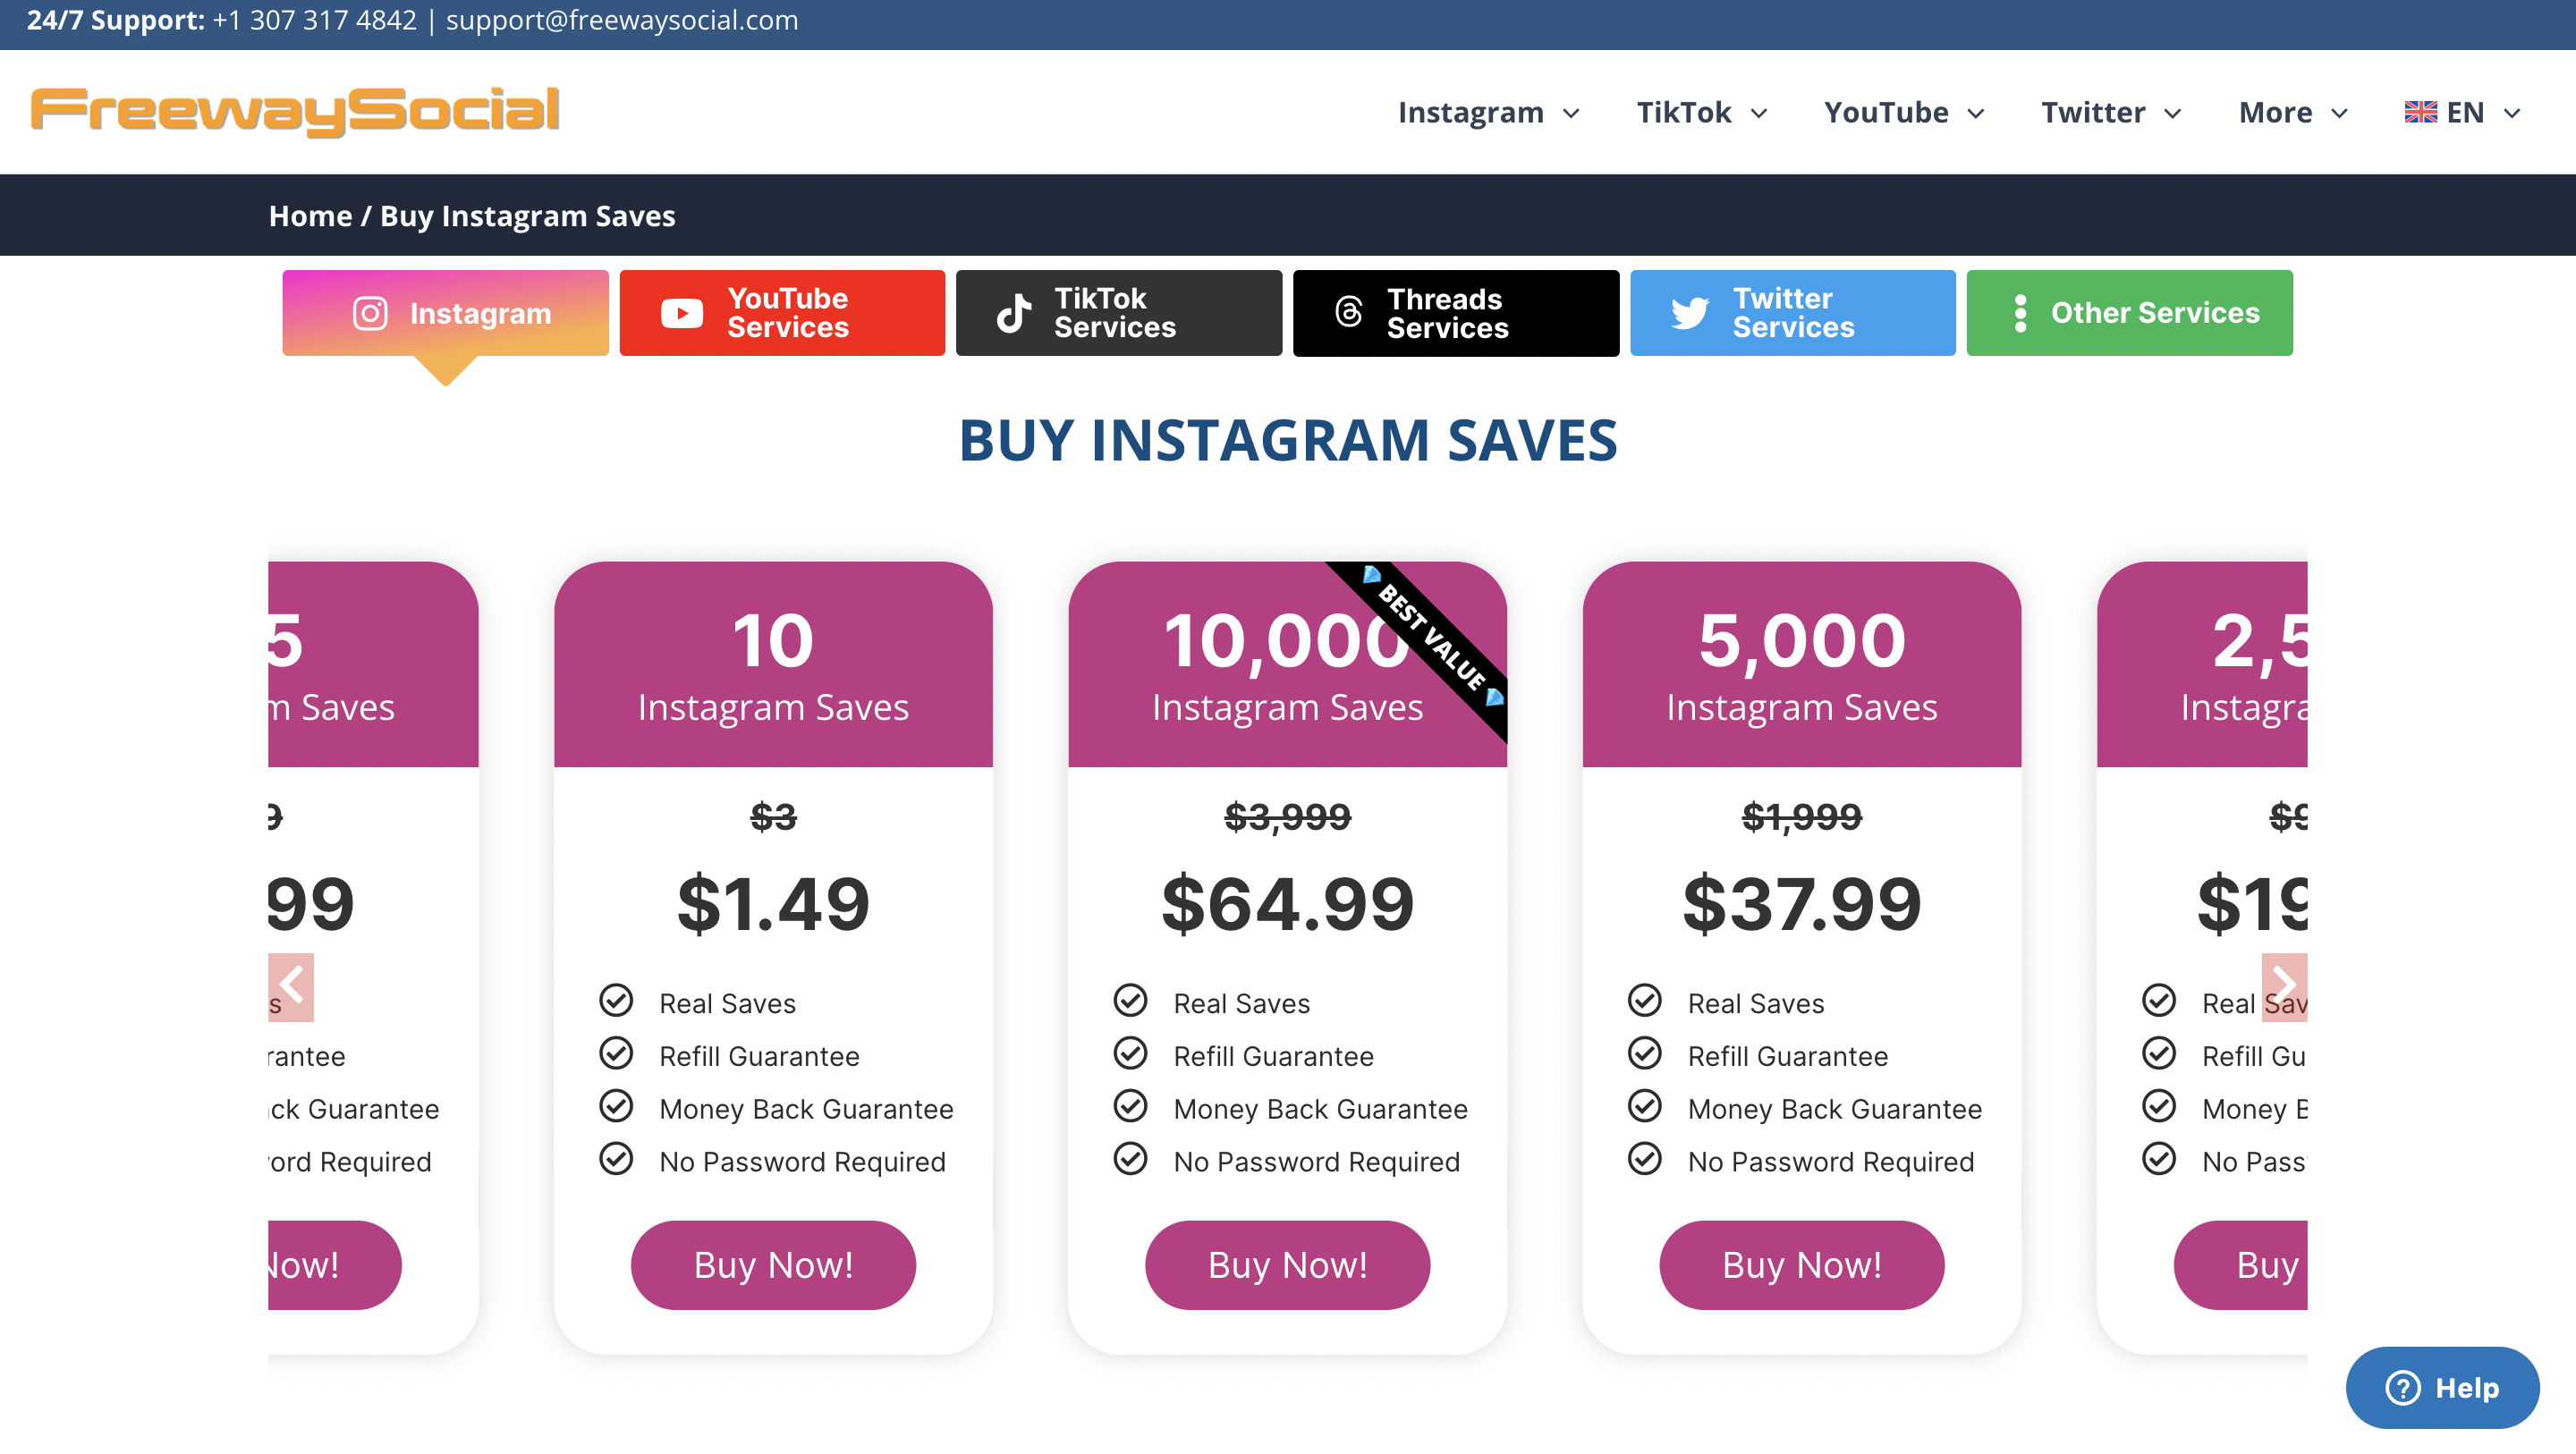 Purchase Instagram saves on FreeWaySocial